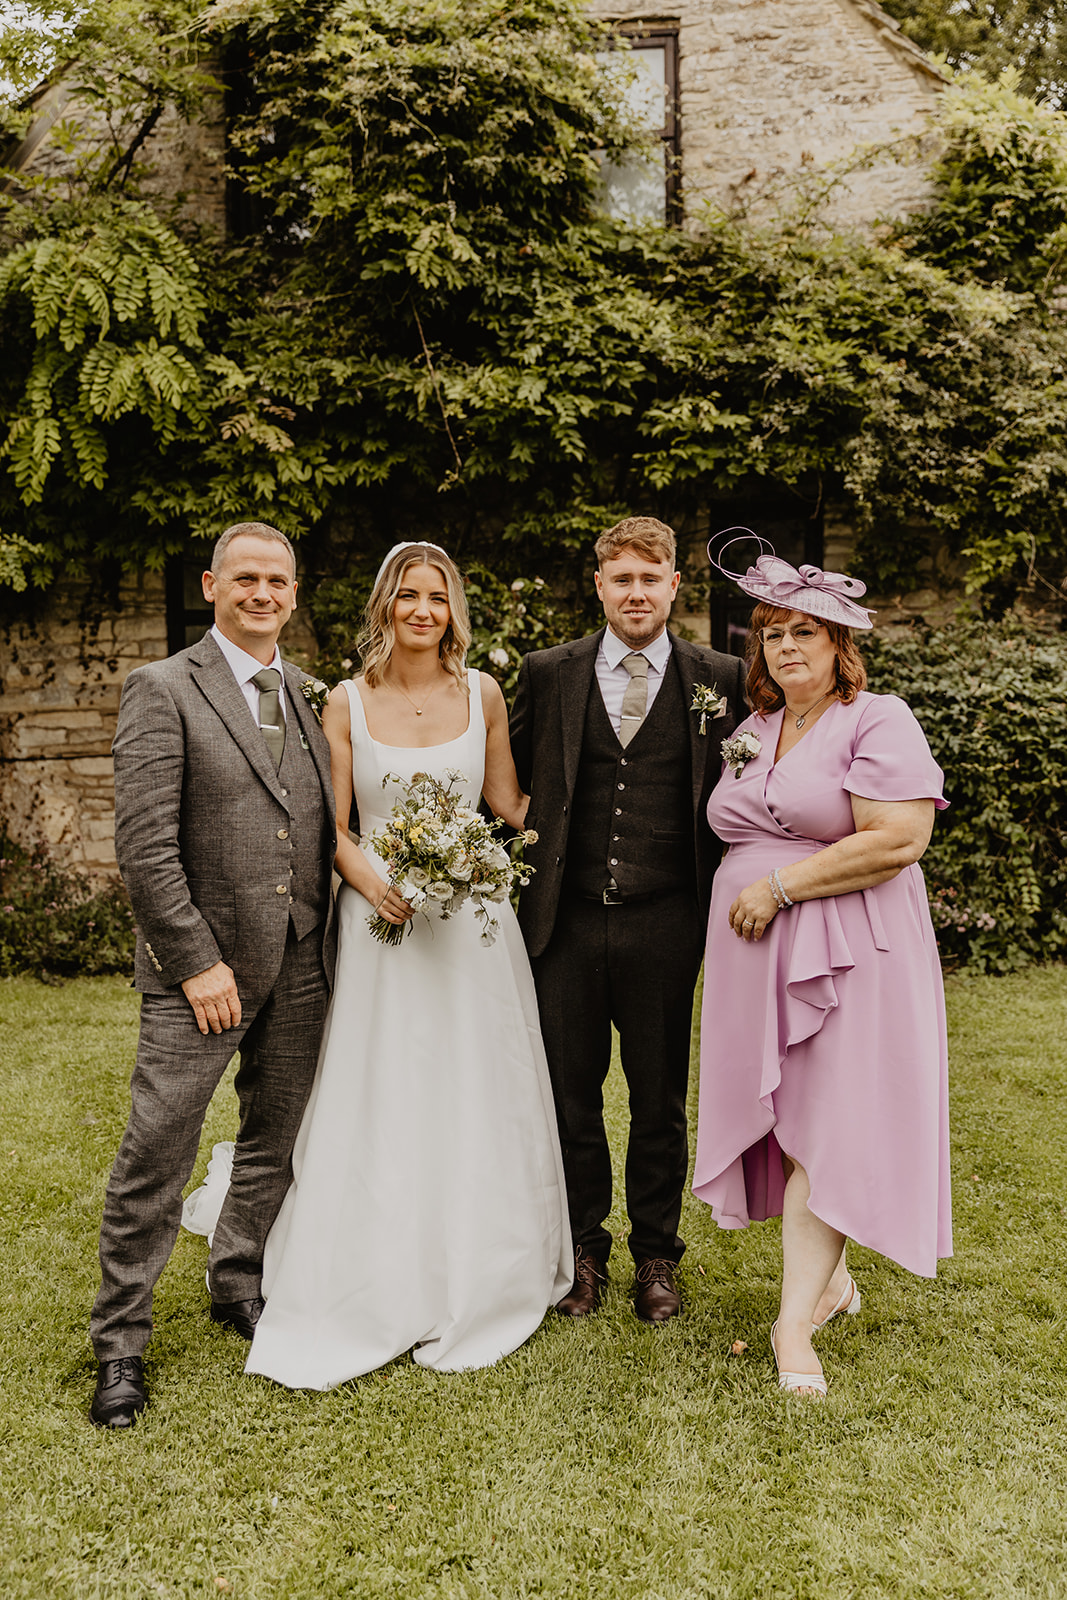 Bridal party at a Great Tythe Barn Wedding, Cotswolds. By Olive Joy Photography.